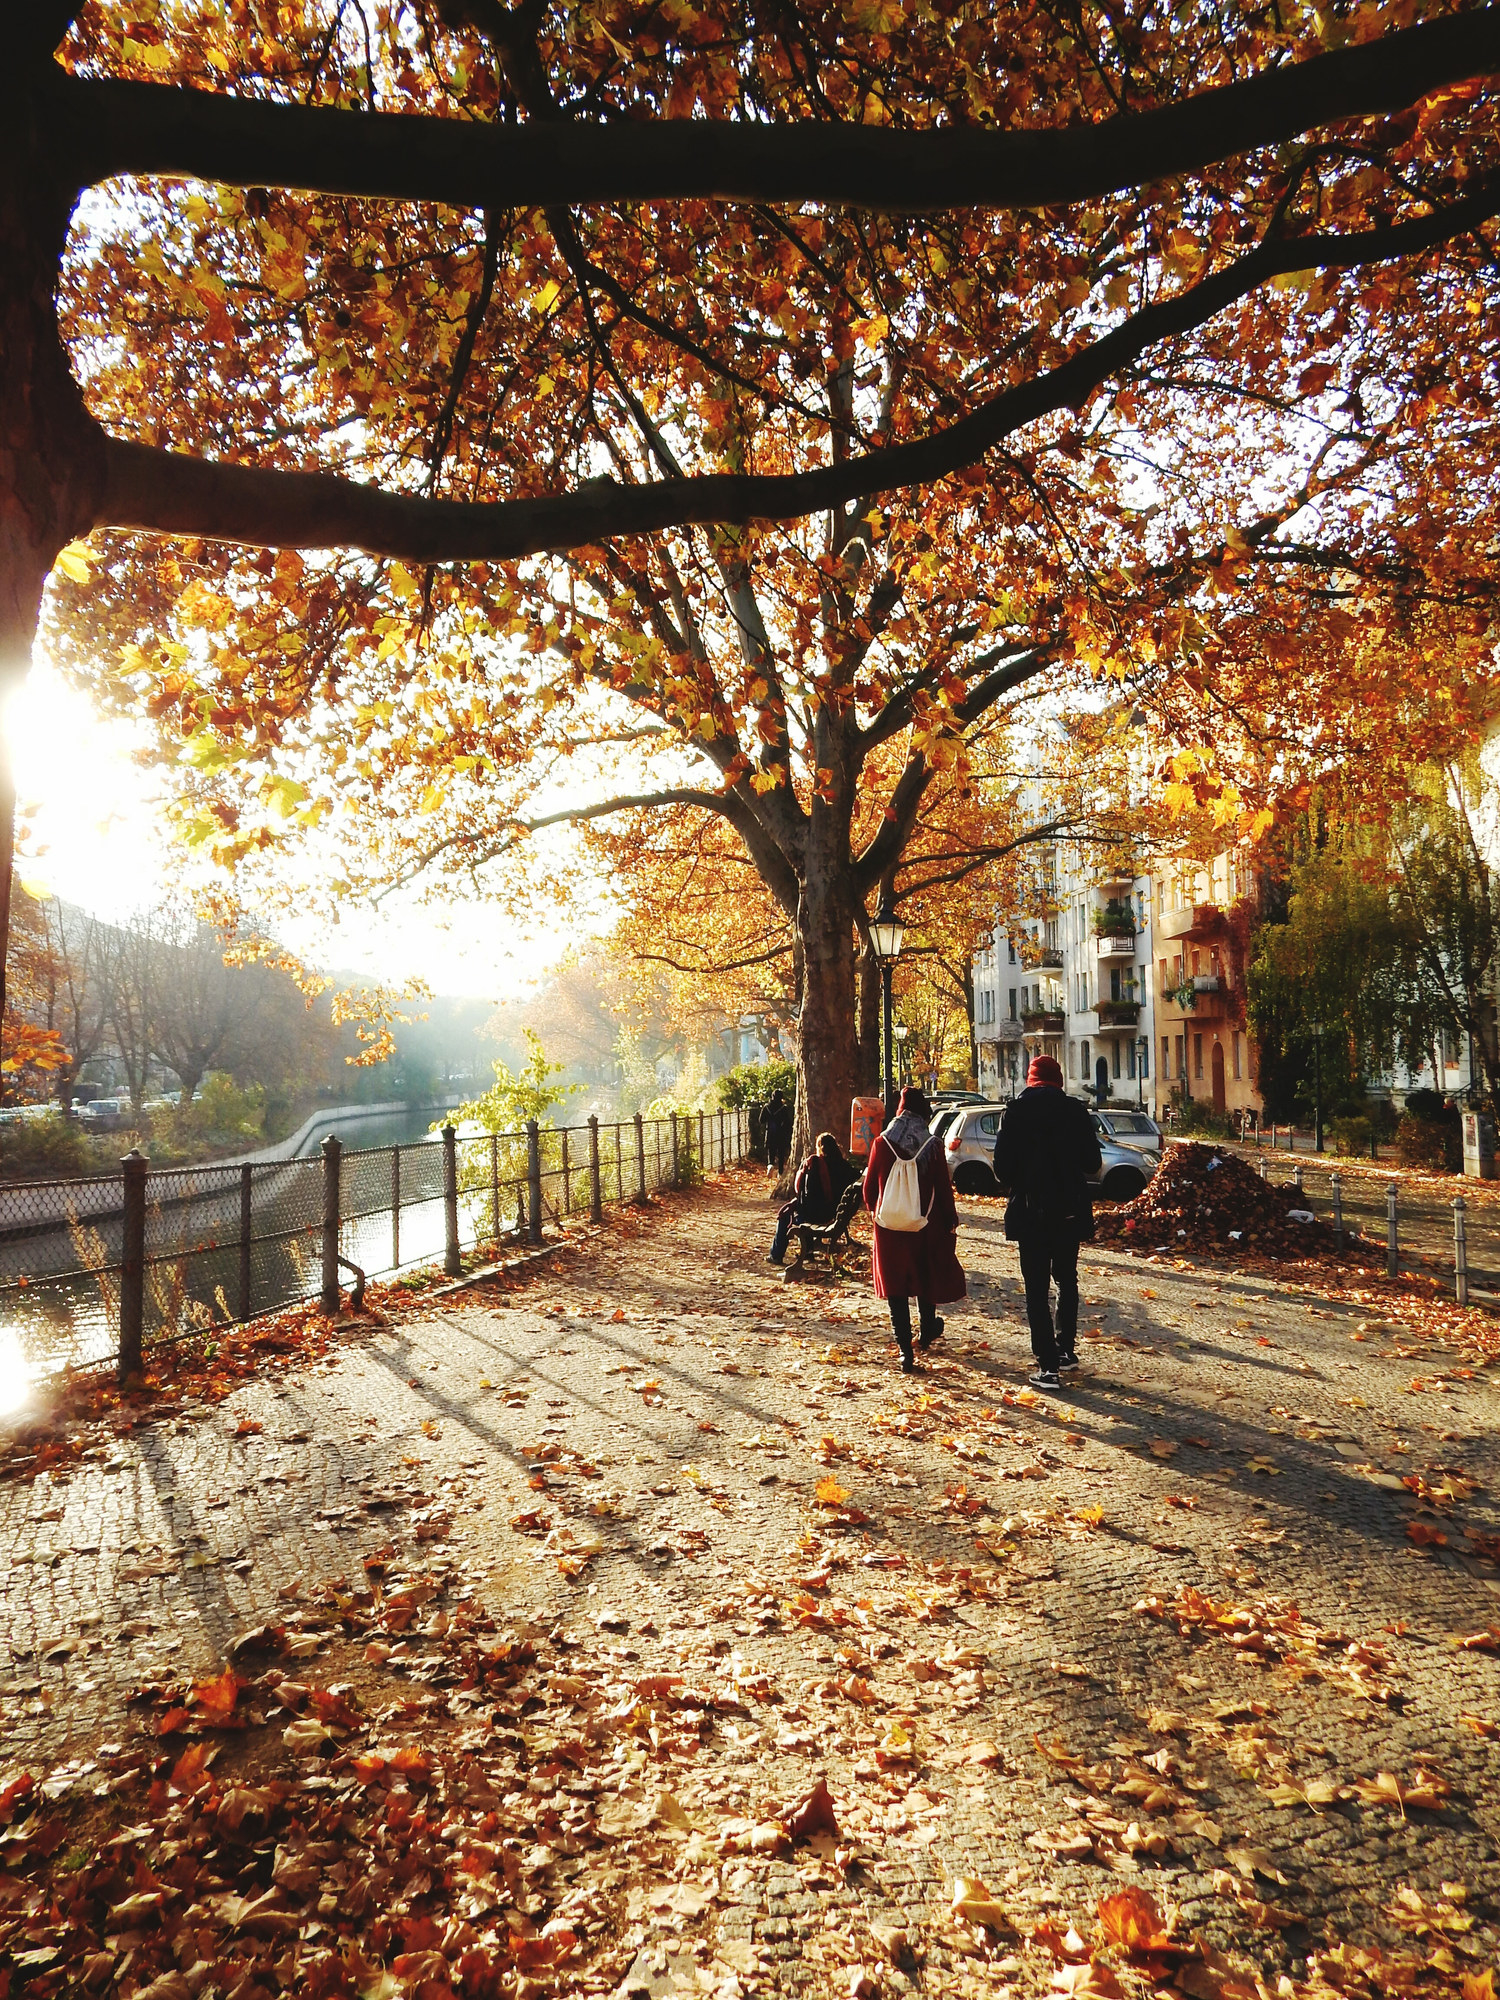 People walking by a canal during autumn.